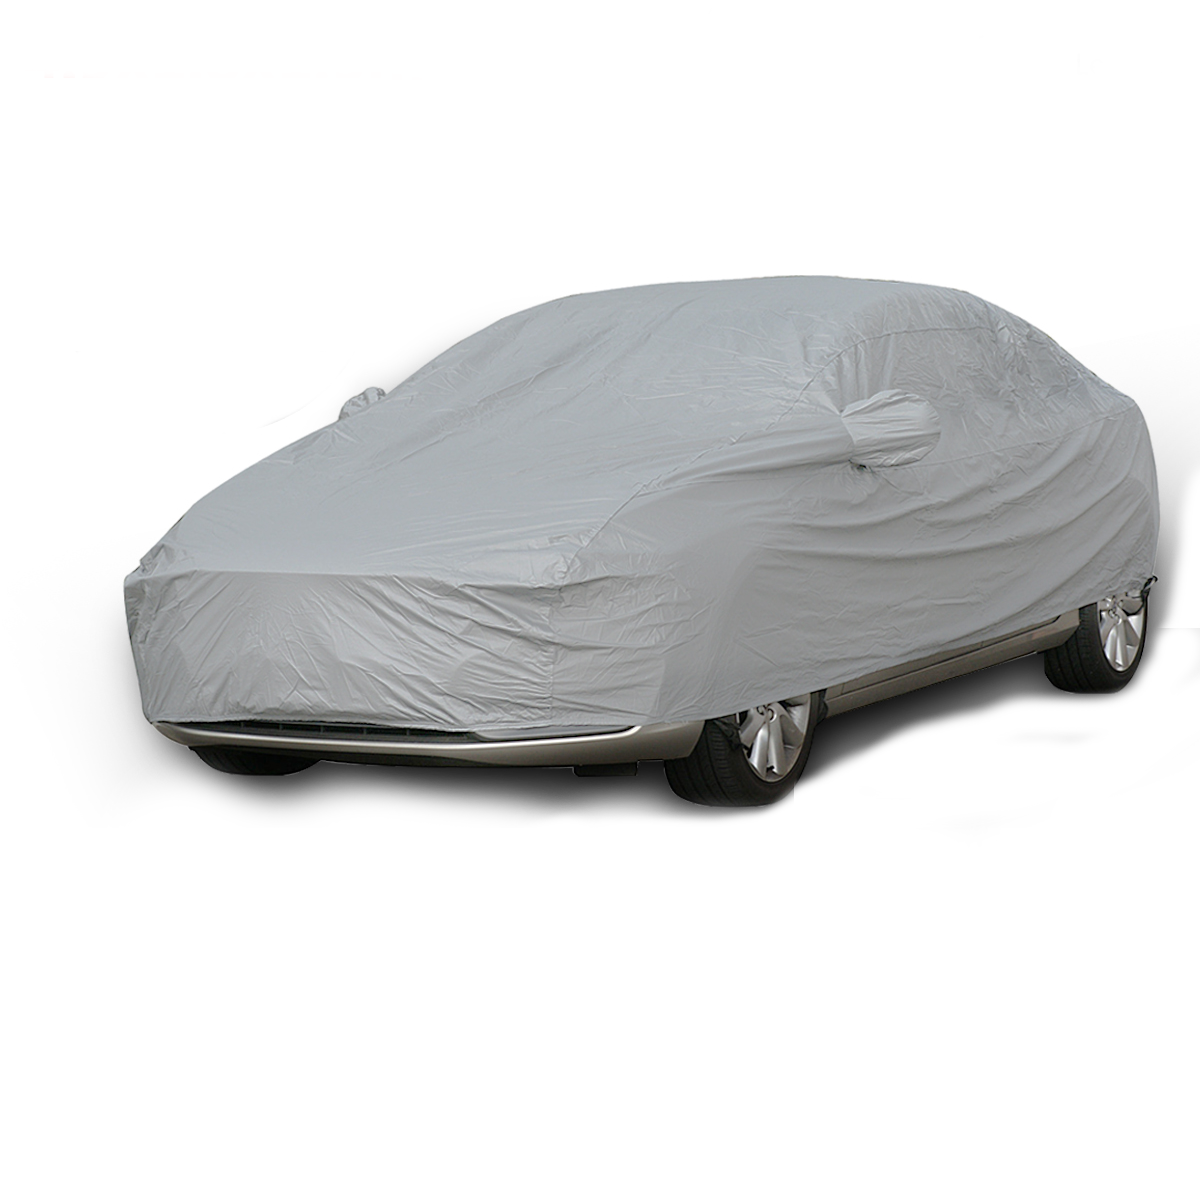 Dark Gray Universal XL Full Car Cover Cotton Waterproof Breathable Rain Snow Protection